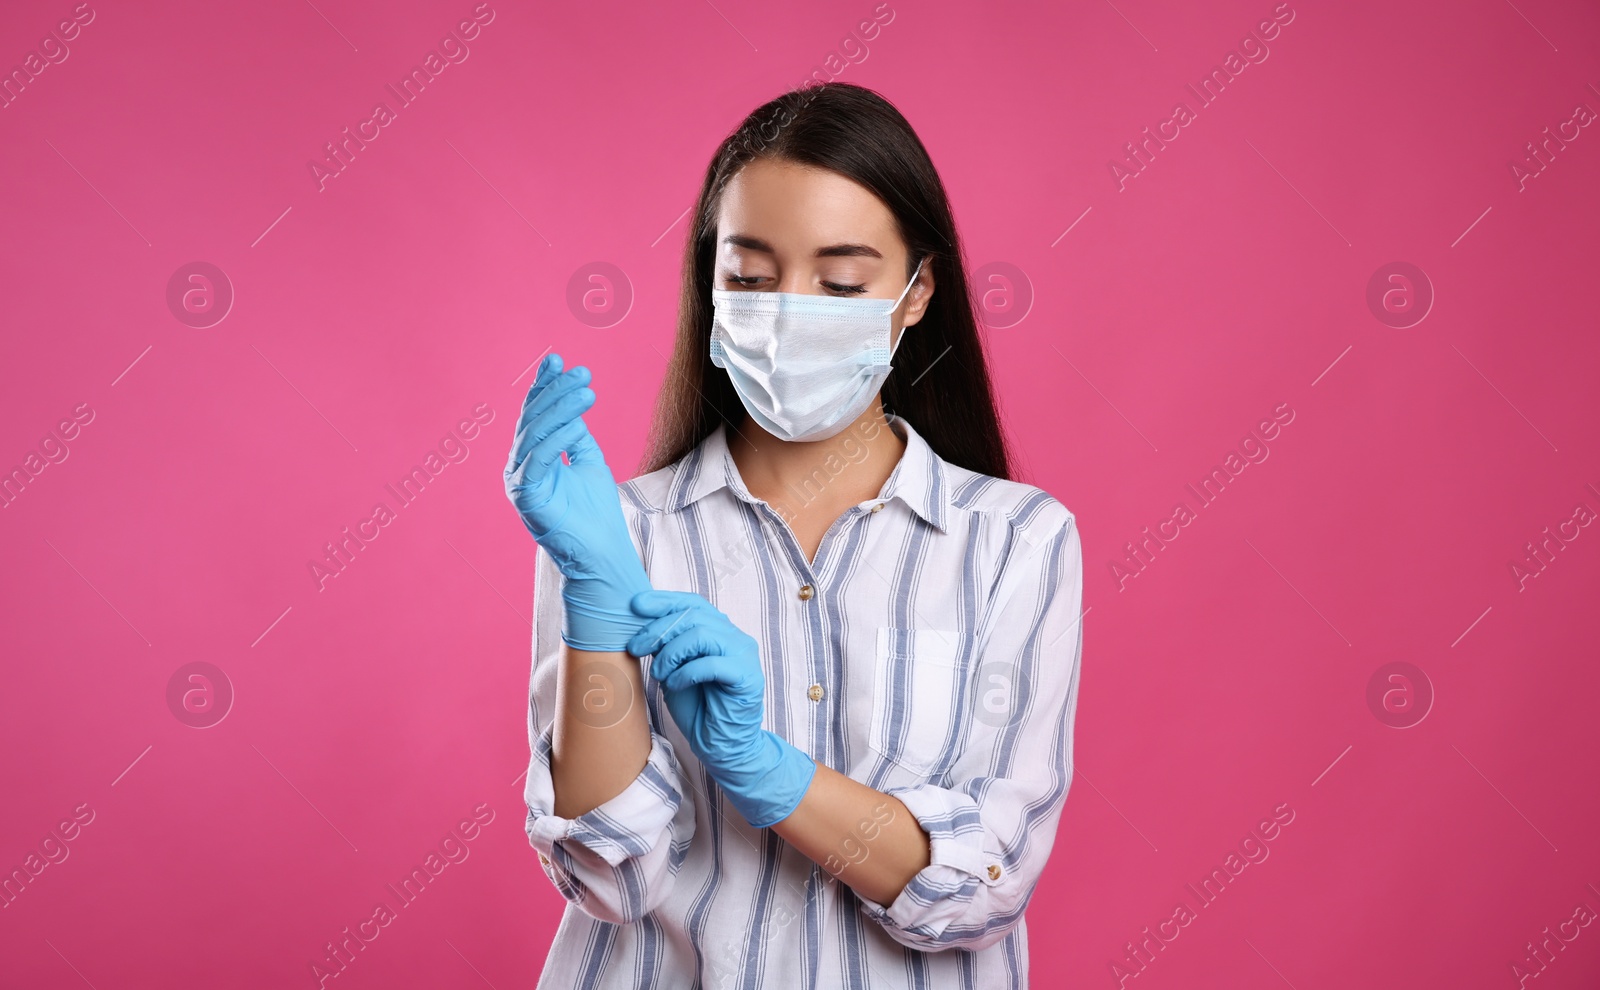 Photo of Woman in protective face mask putting on medical gloves against pink background